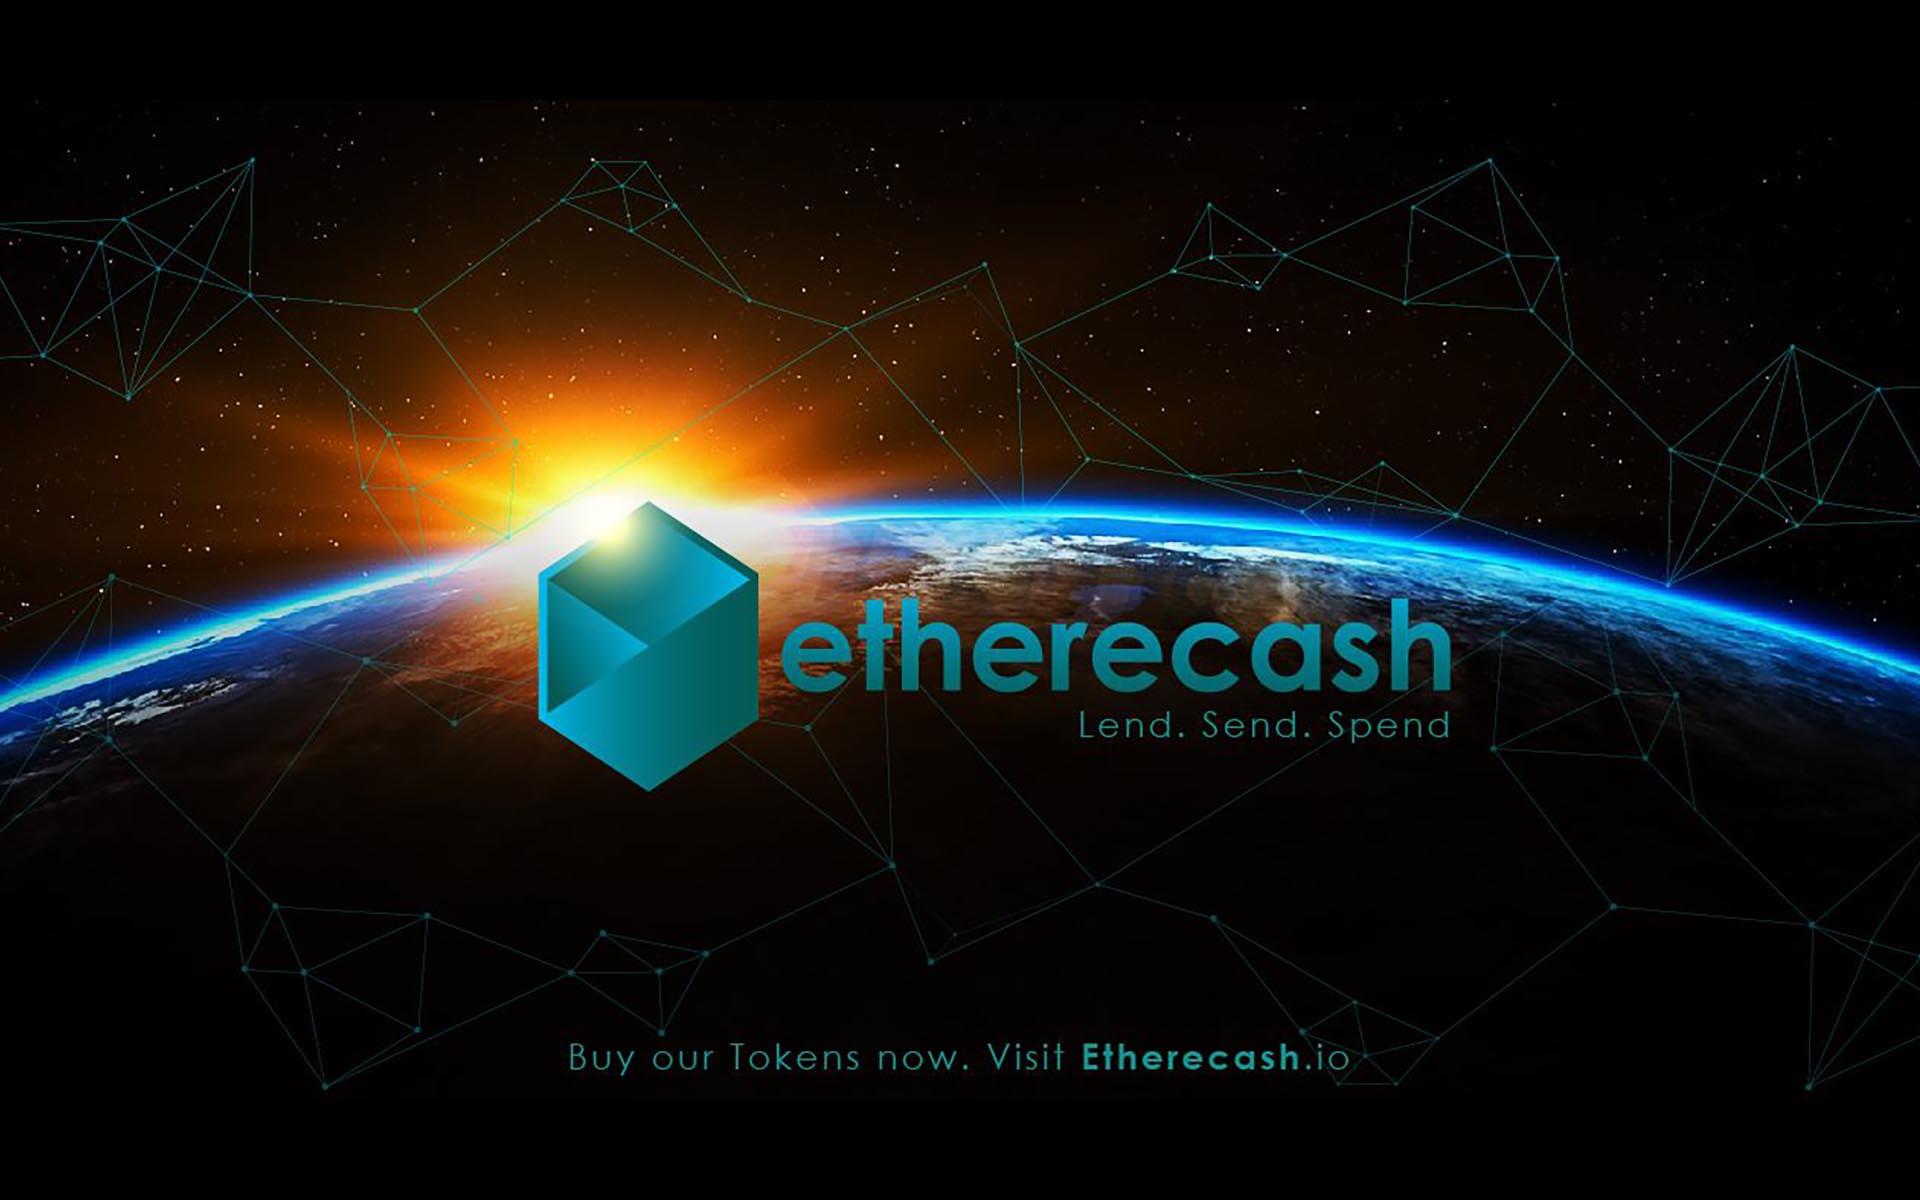 The Etherecash ICO Token Pre-Sale Reported As A Huge Success - ICO Set To Go Live November 15th - Etherecash Is A Peer To Peer Lending Platform Connecting Crypto and Fiat Currencies In A Unique Way